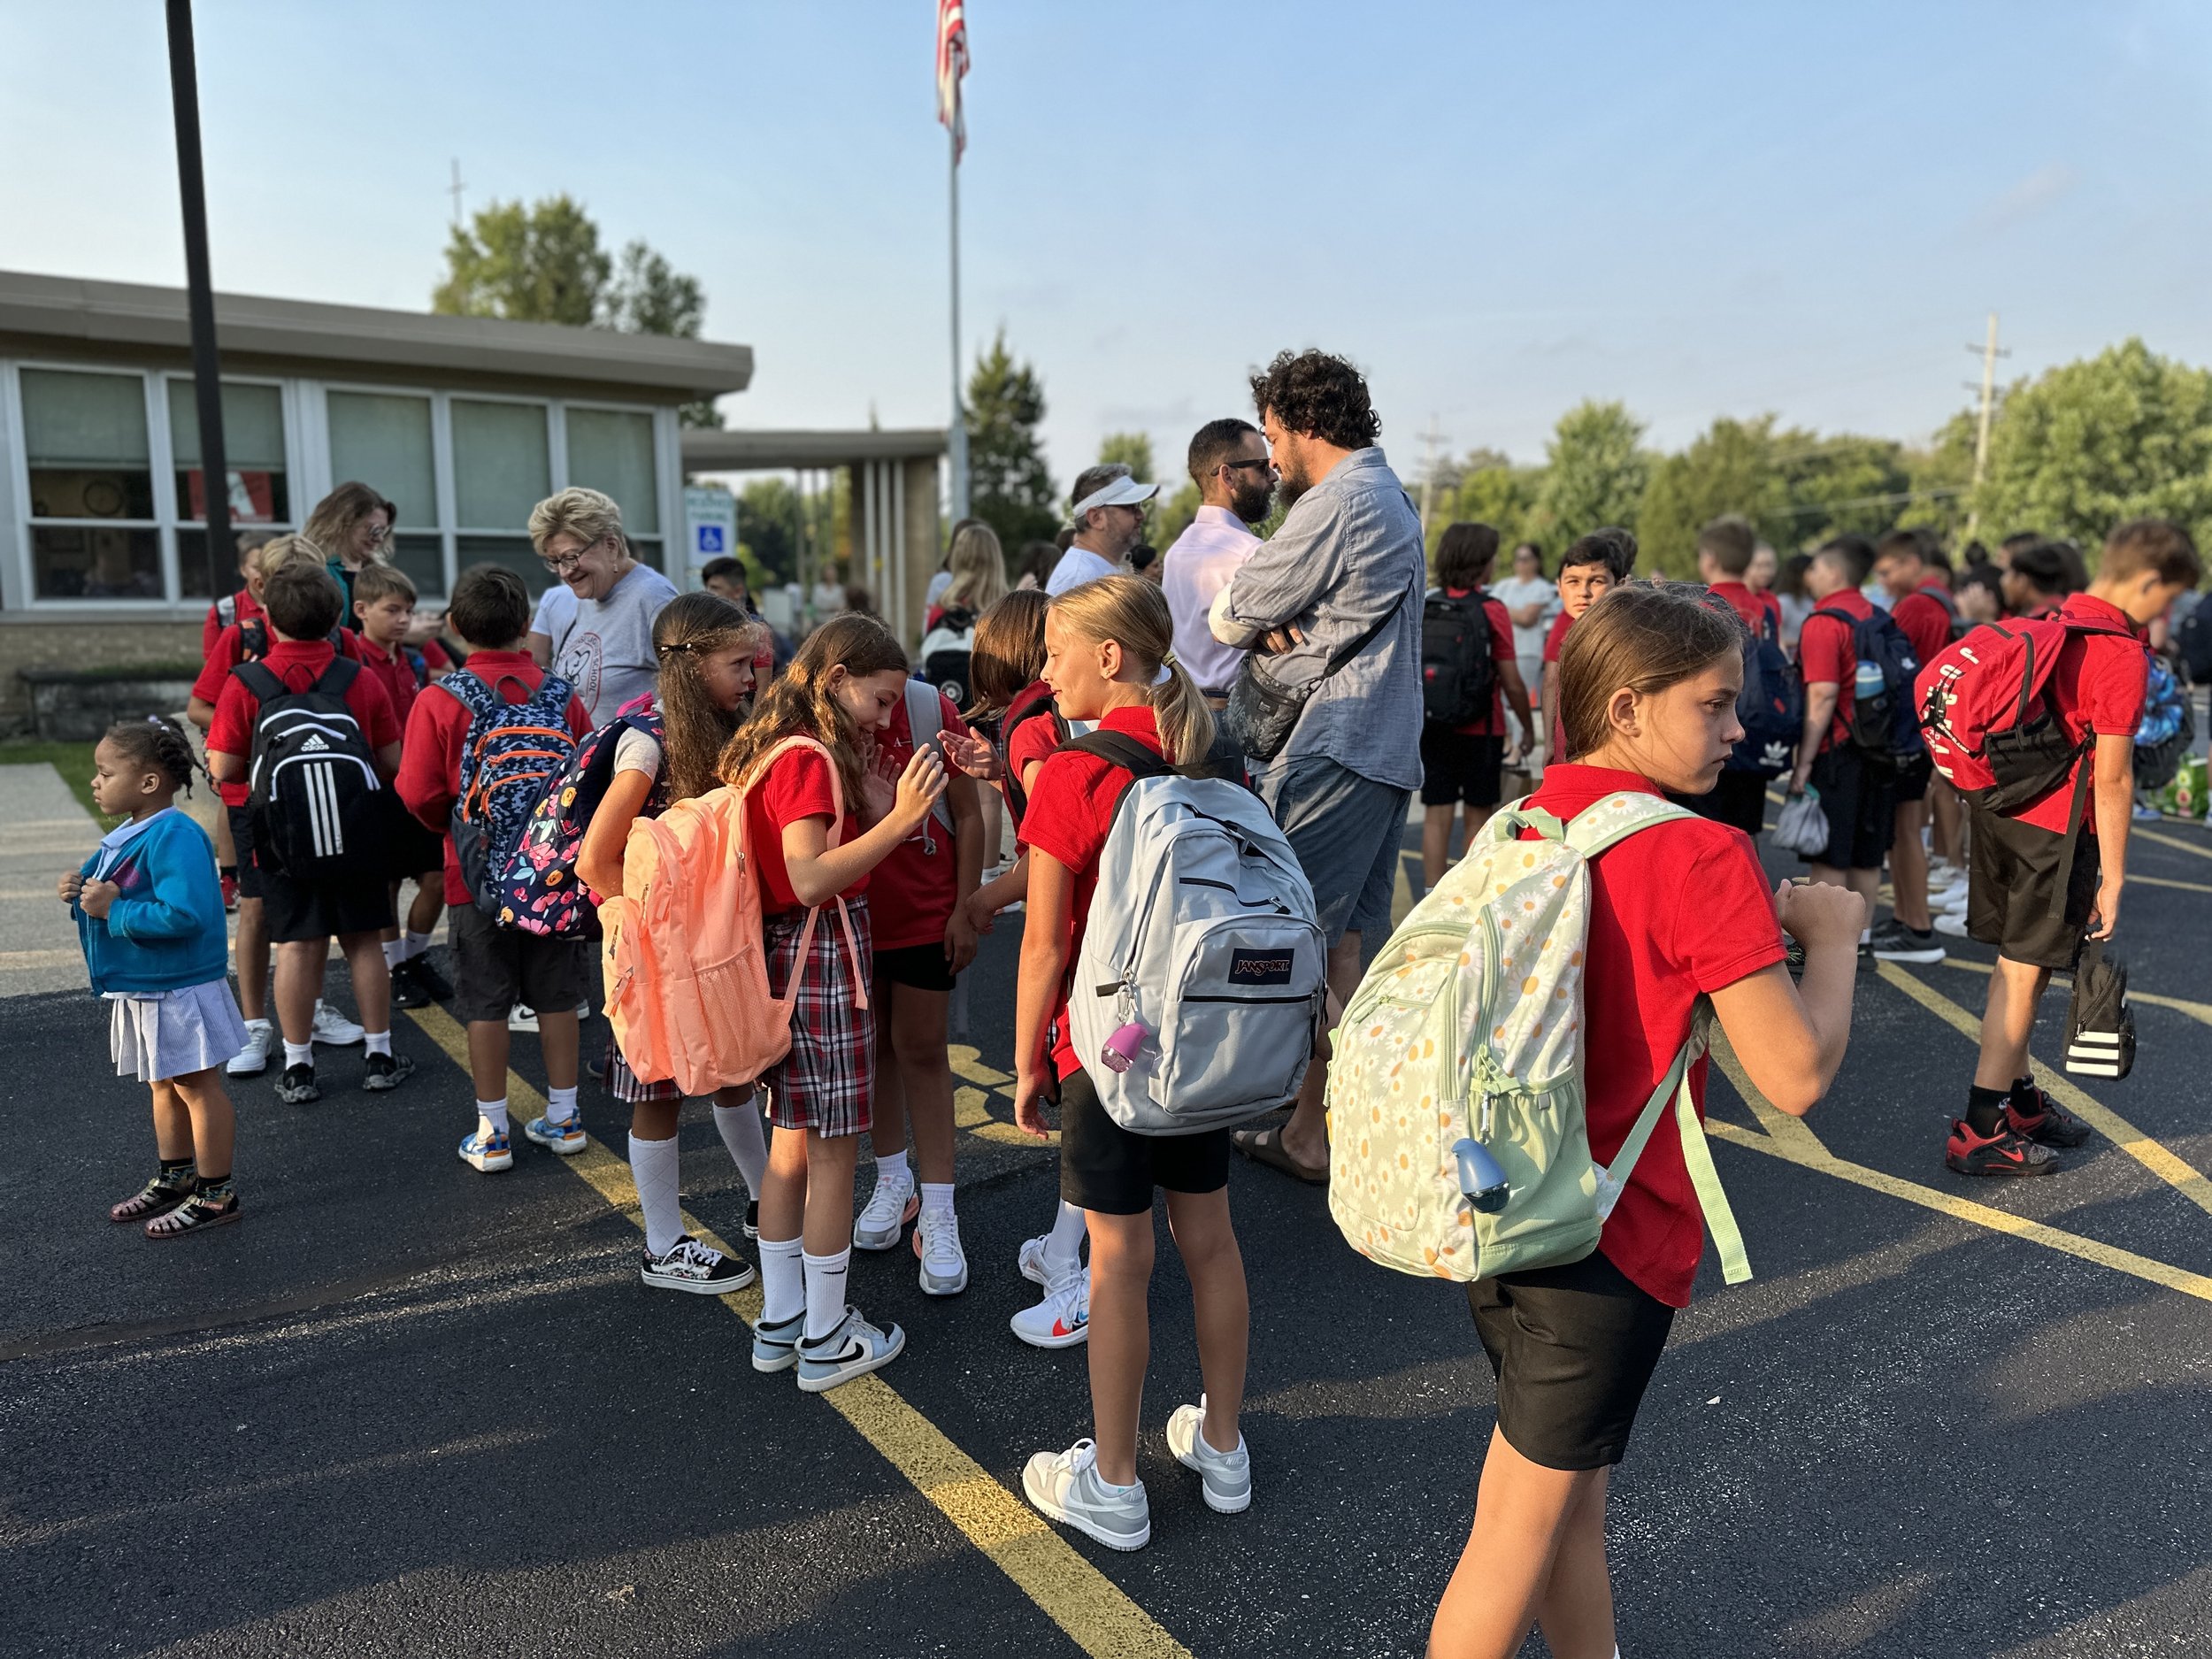  Students are lining up with their classes on the first day of school 